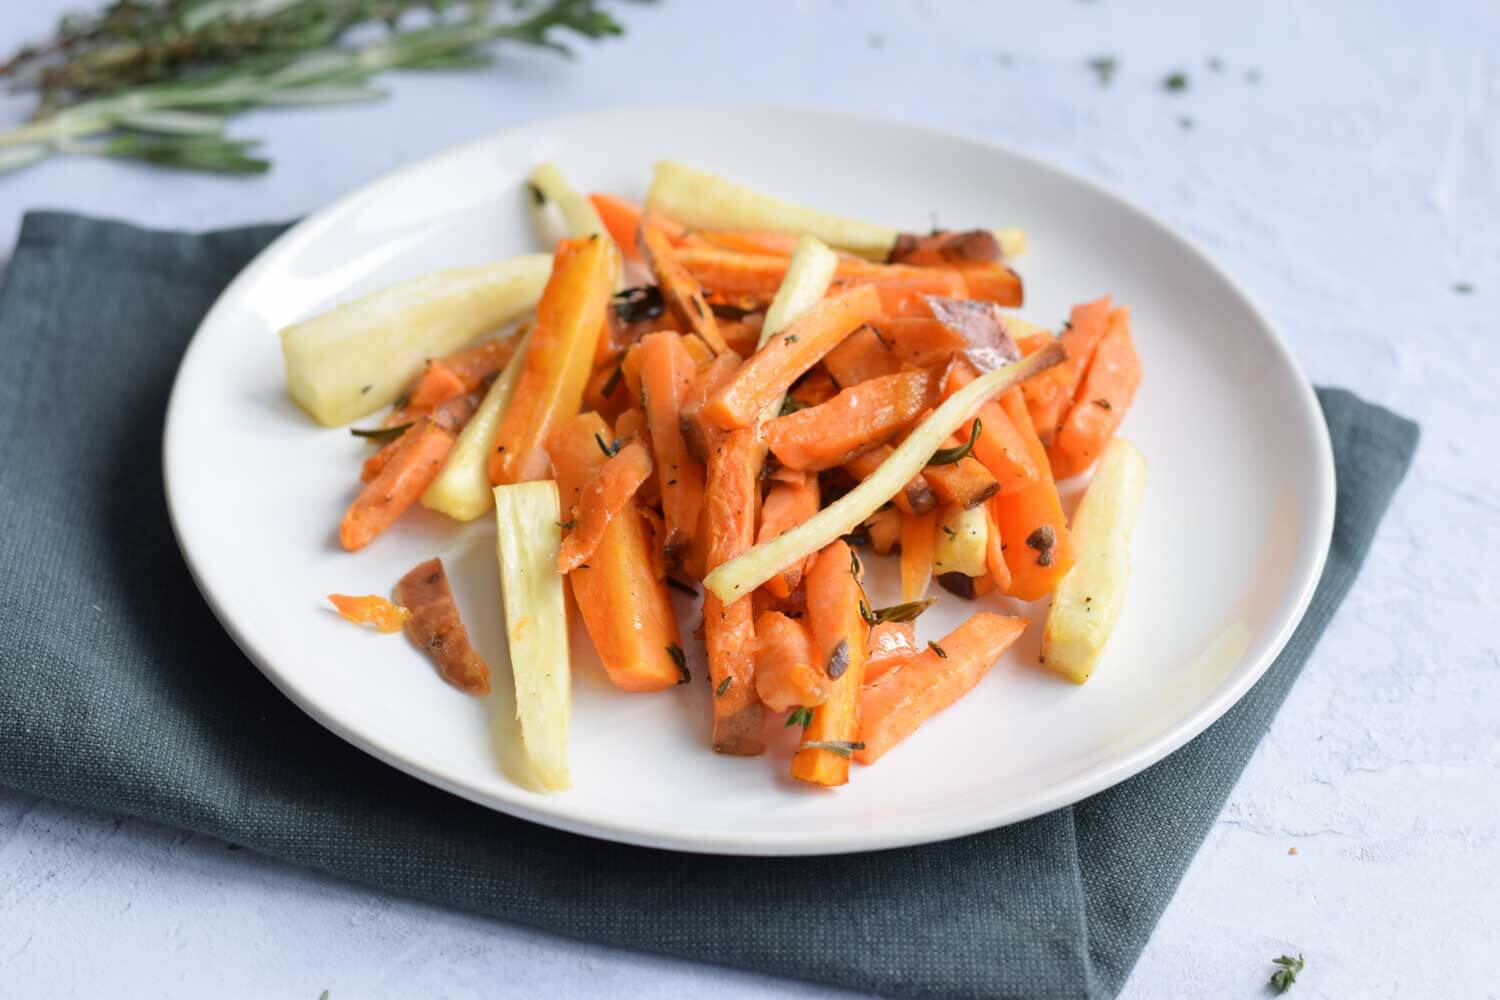 A plate with oven roasted carrots, parsnips and sweet potatoes